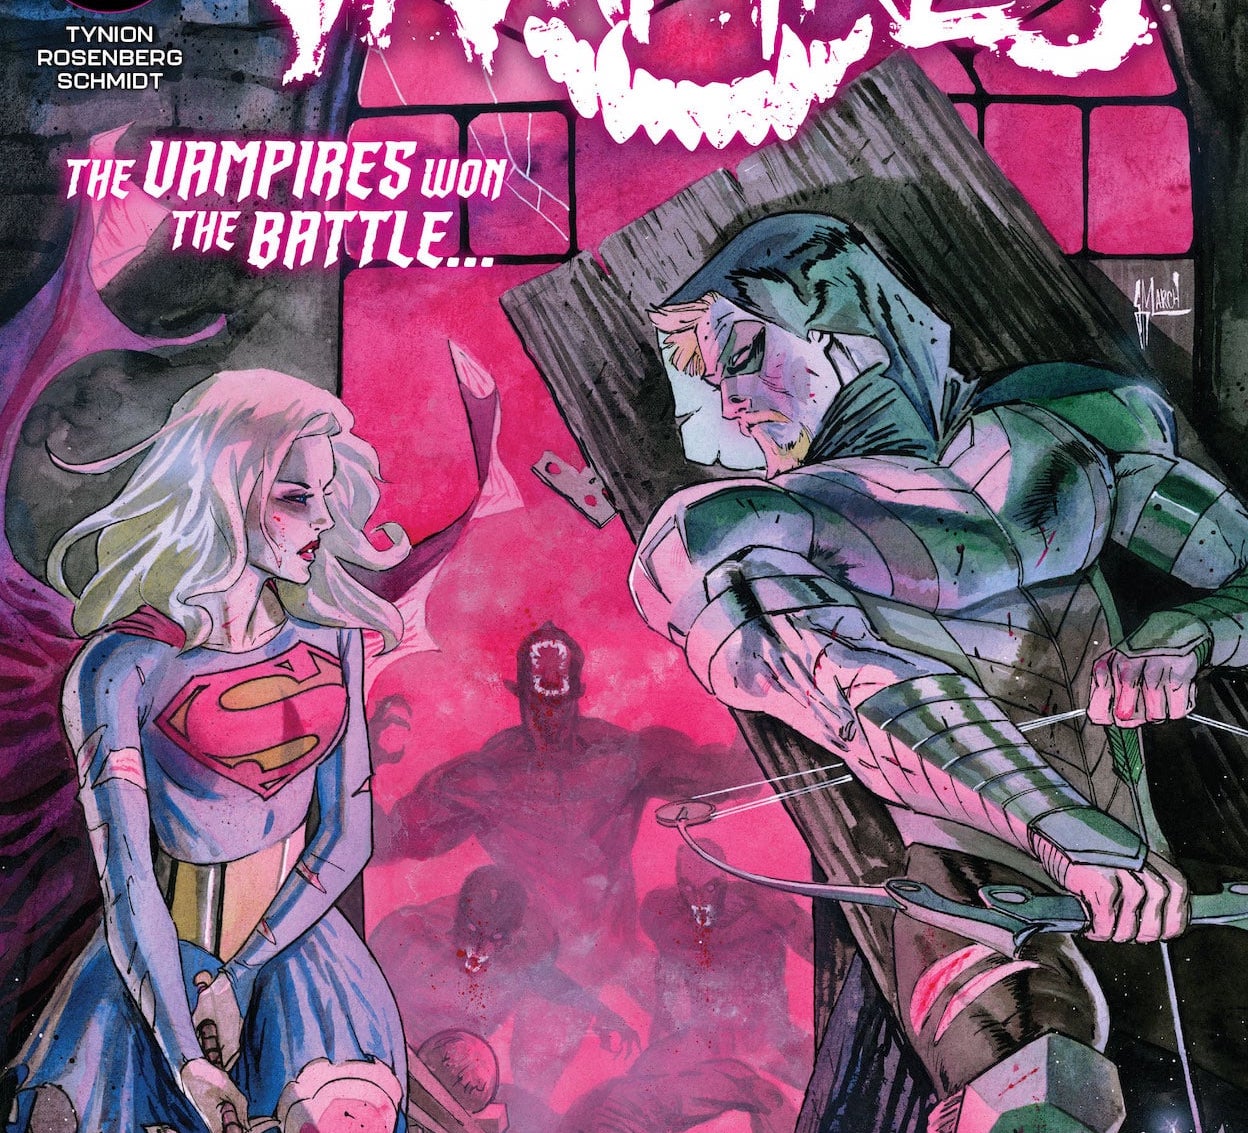 'DC vs. Vampires' #7 sets the stage for how the heroes can win